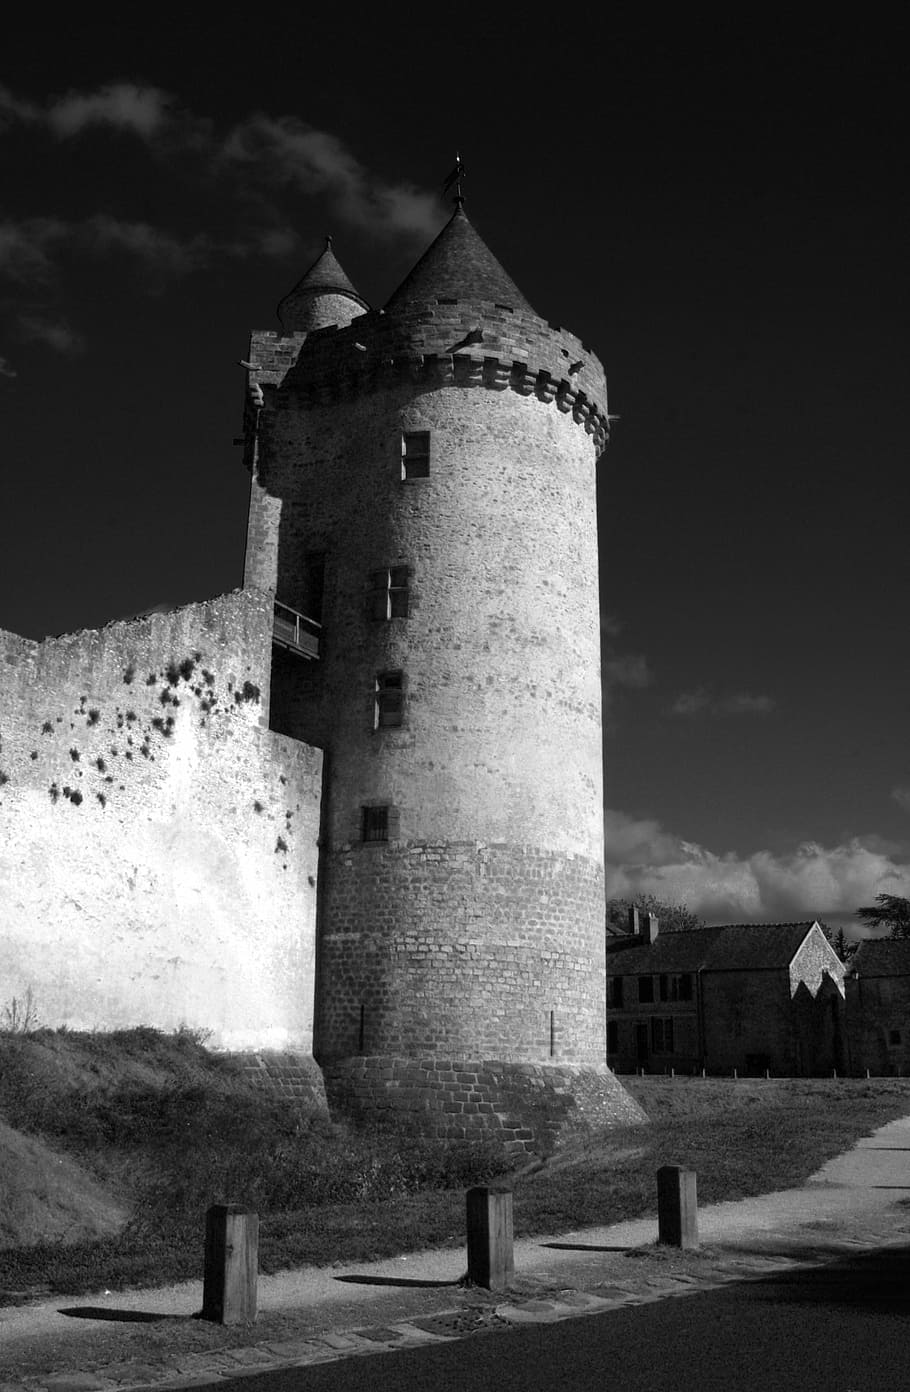 blandy towers, fort, strong castle, black and white, france, heritage, architecture, built structure, building exterior, sky